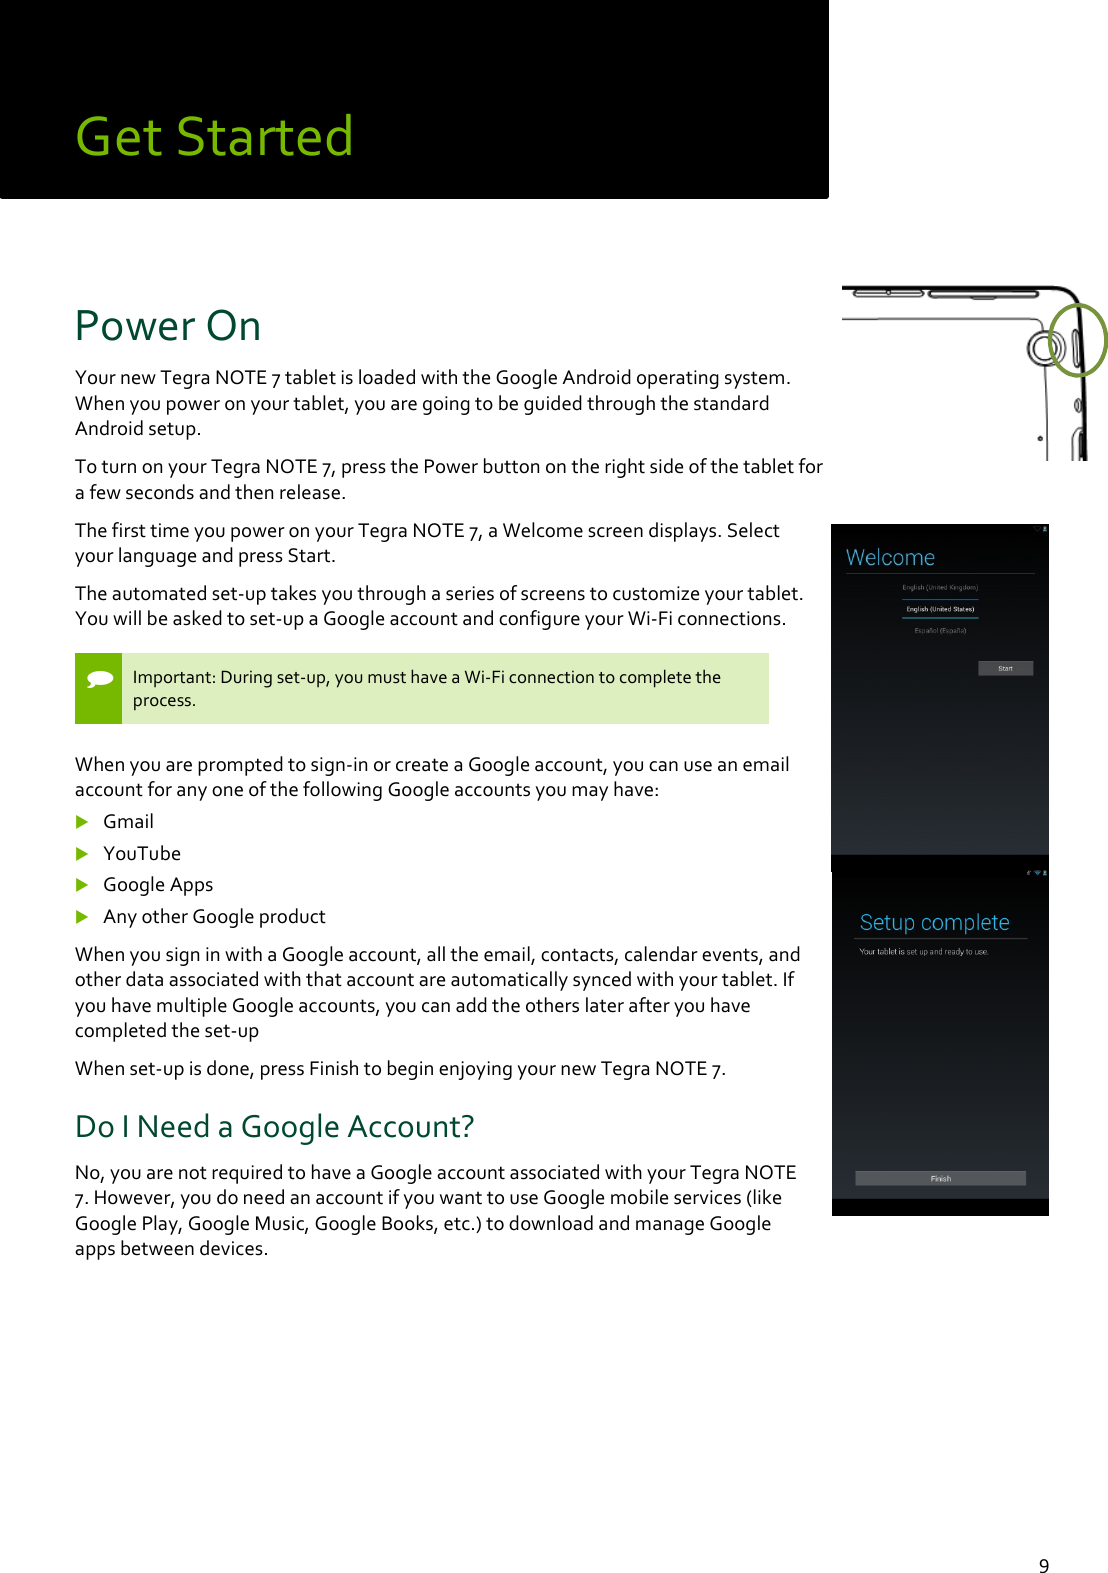  9 Get Started Power On  Your new Tegra NOTE 7 tablet is loaded with the Google Android operating system. When you power on your tablet, you are going to be guided through the standard Android setup. To turn on your Tegra NOTE 7, press the Power button on the right side of the tablet for a few seconds and then release.  The first time you power on your Tegra NOTE 7, a Welcome screen displays. Select your language and press Start.  The automated set-up takes you through a series of screens to customize your tablet. You will be asked to set-up a Google account and configure your Wi-Fi connections.   Important: During set-up, you must have a Wi-Fi connection to complete the process.  When you are prompted to sign-in or create a Google account, you can use an email account for any one of the following Google accounts you may have:  Gmail  YouTube  Google Apps  Any other Google product  When you sign in with a Google account, all the email, contacts, calendar events, and other data associated with that account are automatically synced with your tablet. If you have multiple Google accounts, you can add the others later after you have completed the set-up When set-up is done, press Finish to begin enjoying your new Tegra NOTE 7. Do I Need a Google Account? No, you are not required to have a Google account associated with your Tegra NOTE 7. However, you do need an account if you want to use Google mobile services (like Google Play, Google Music, Google Books, etc.) to download and manage Google apps between devices.     